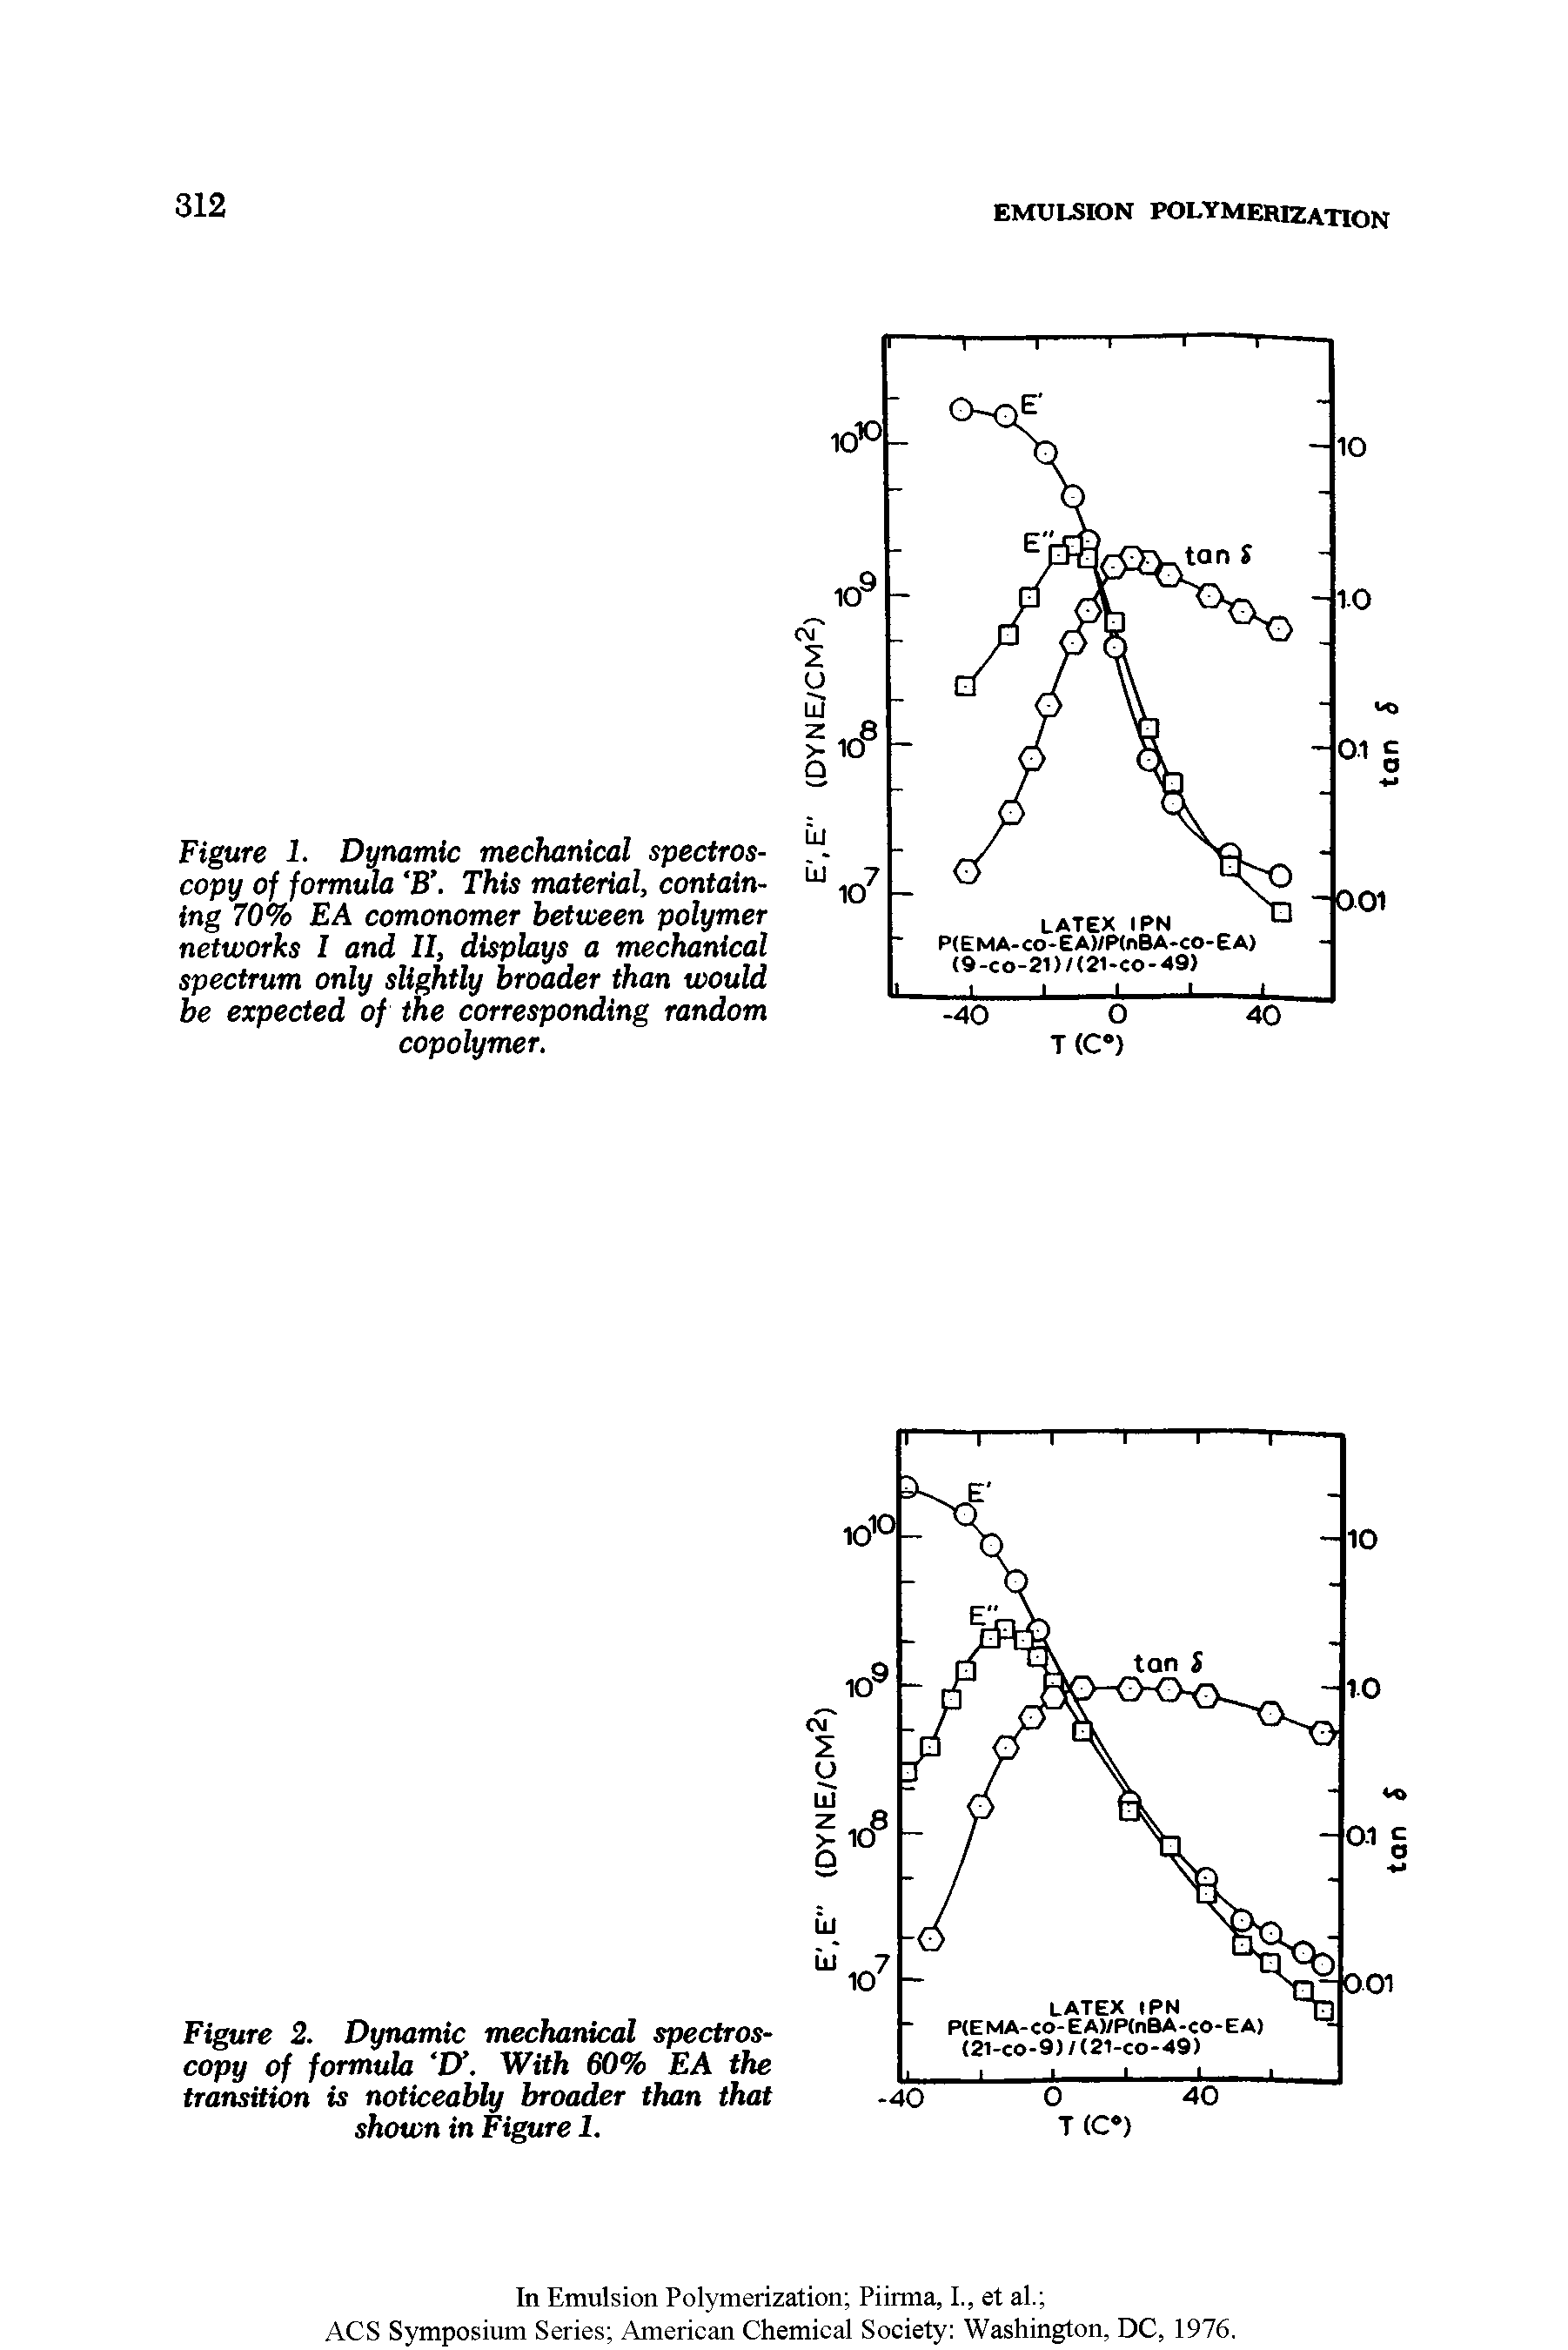 Figure 1. Dynamic mechanical spectroscopy of formula B This material, containing 70% EA comonomer between polymer networks I and II, displays a mechanical spectrum only slightly broader than would be expected of the corresponding random copolymer.